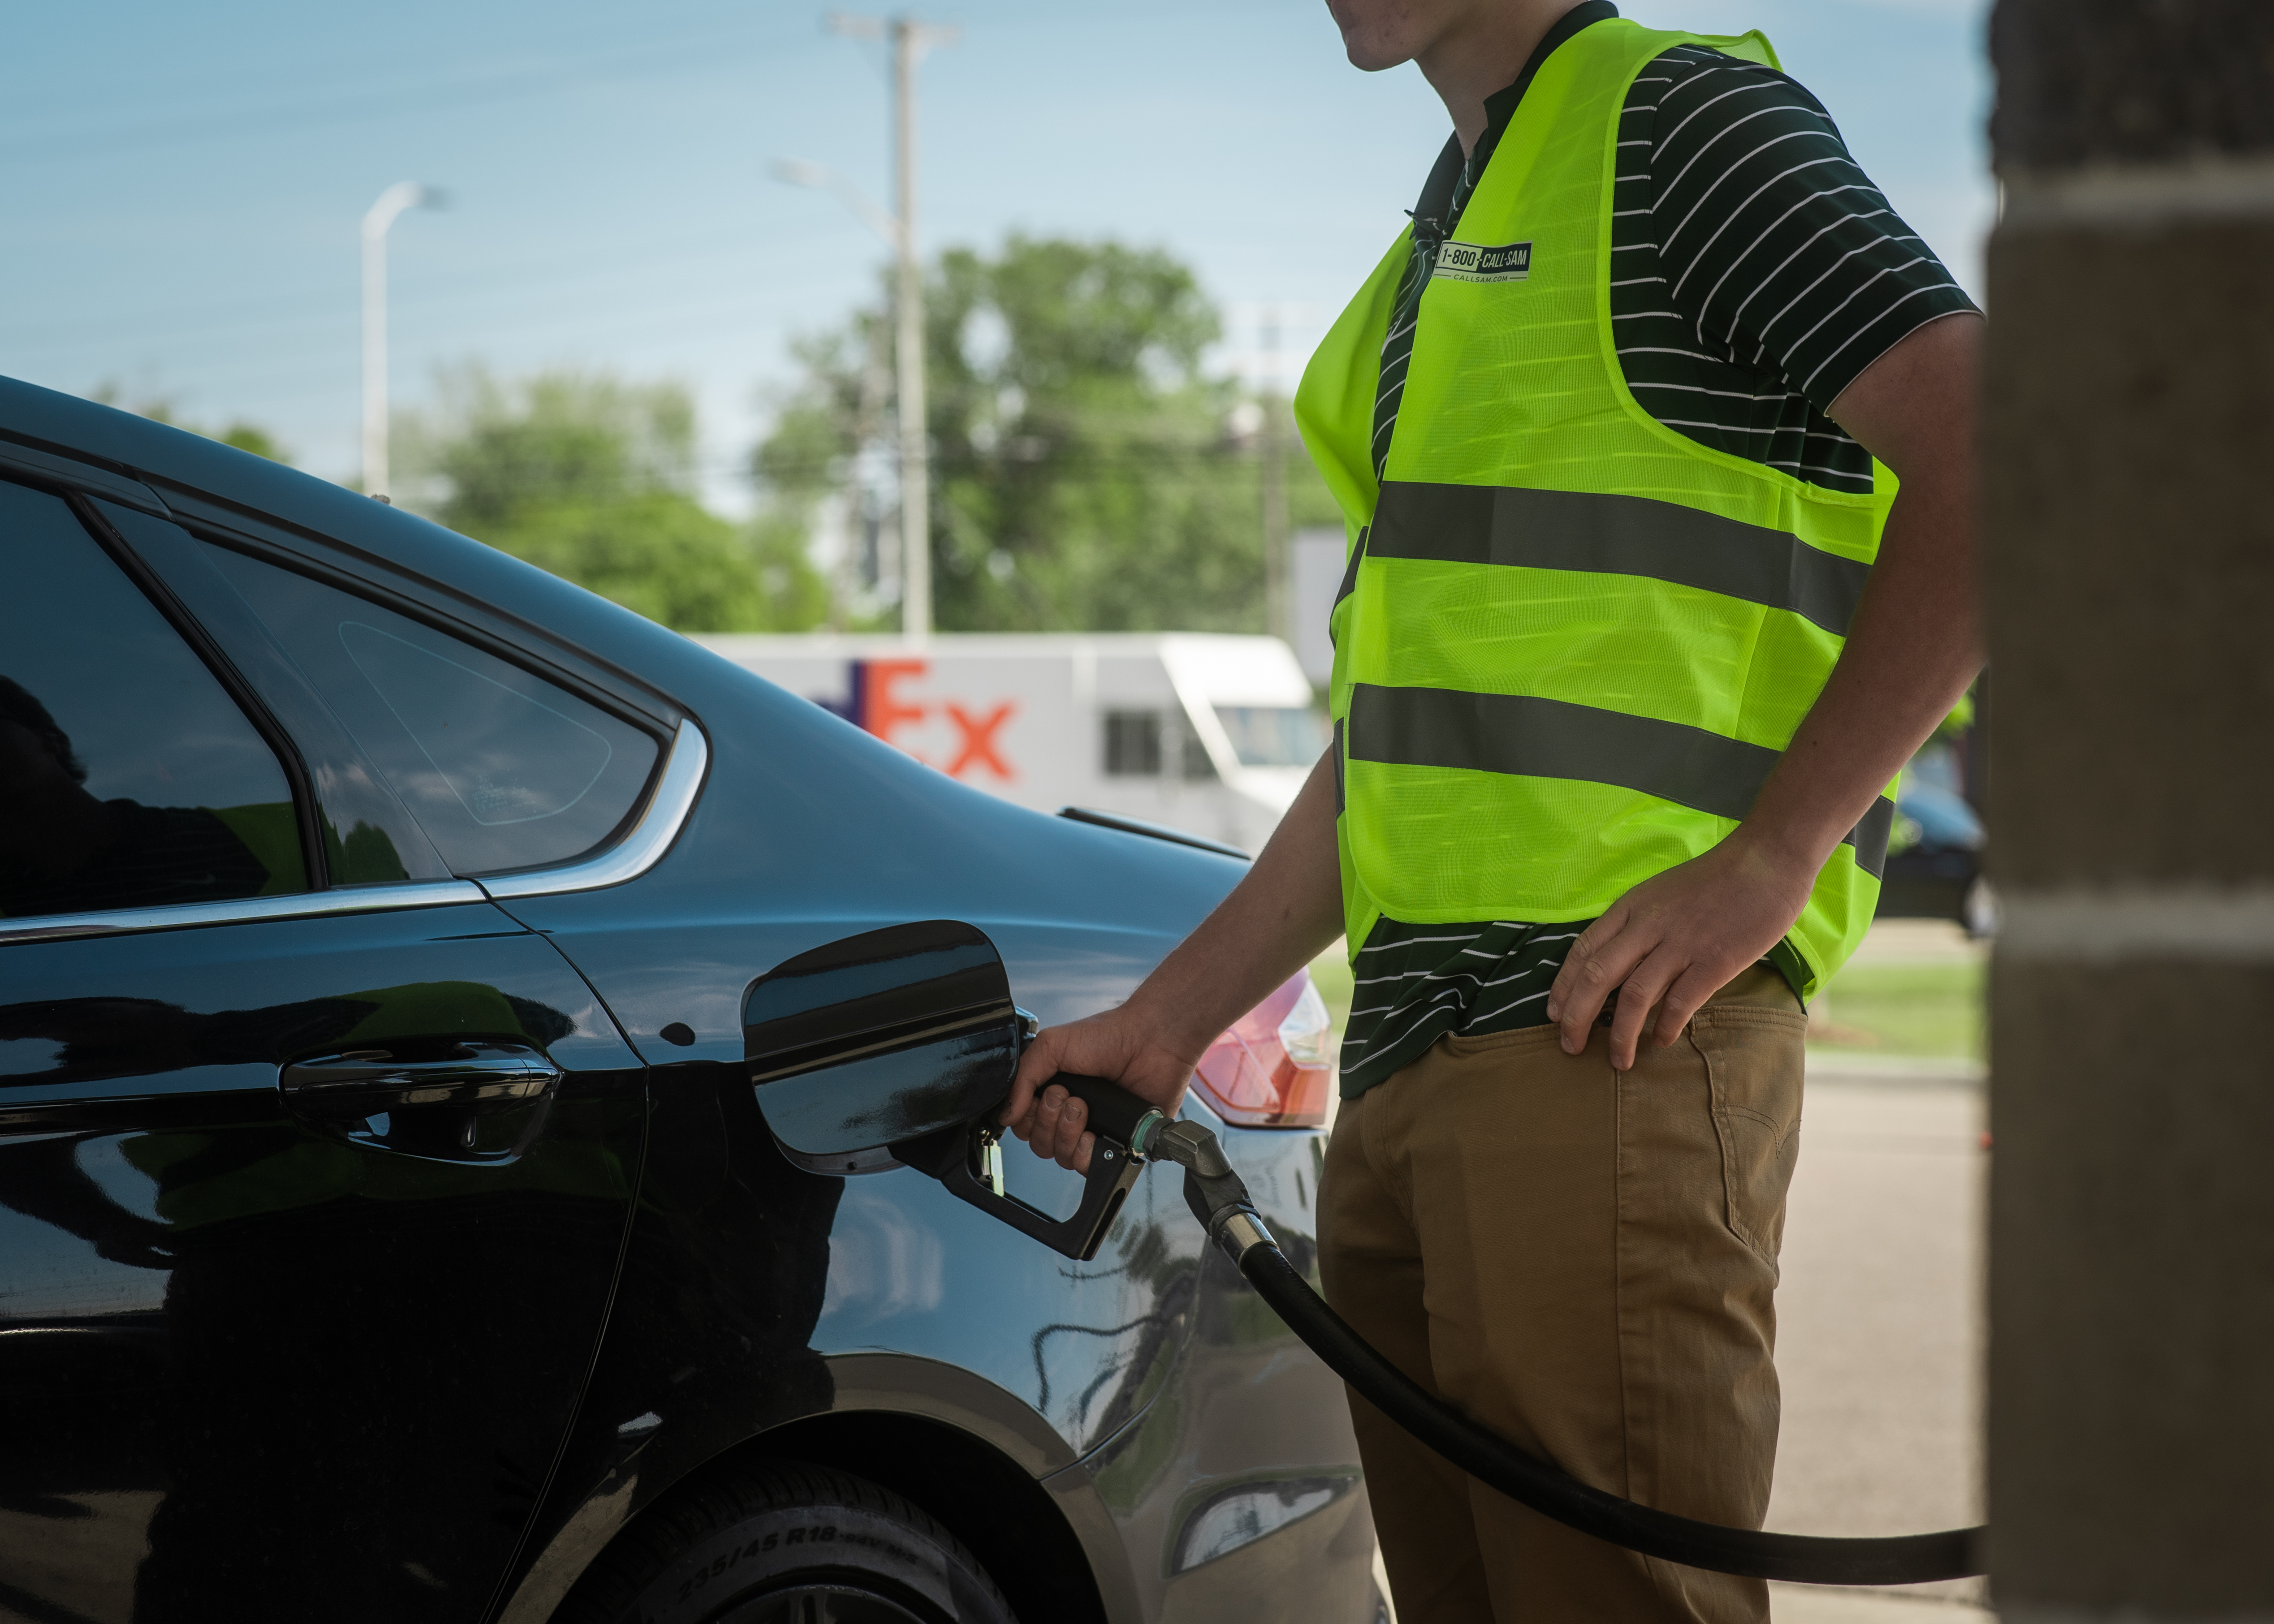 Volunteer pumping gas wearing a safety vest for the Gas Giveaway program